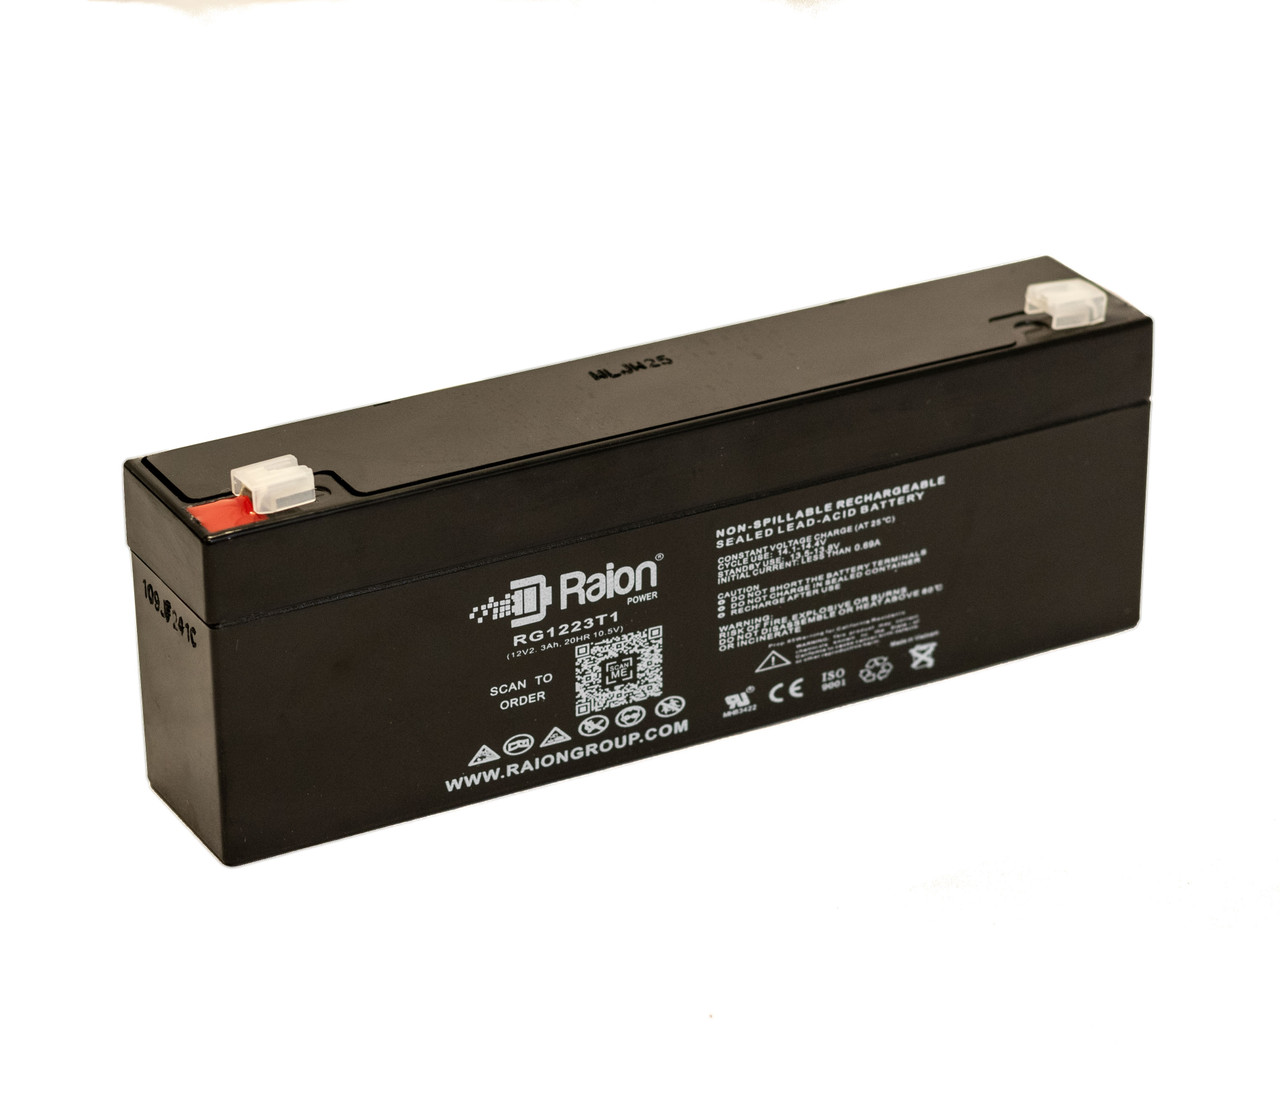 Raion Power RG1223T1 Replacement Battery for NEATA NT12-2.3